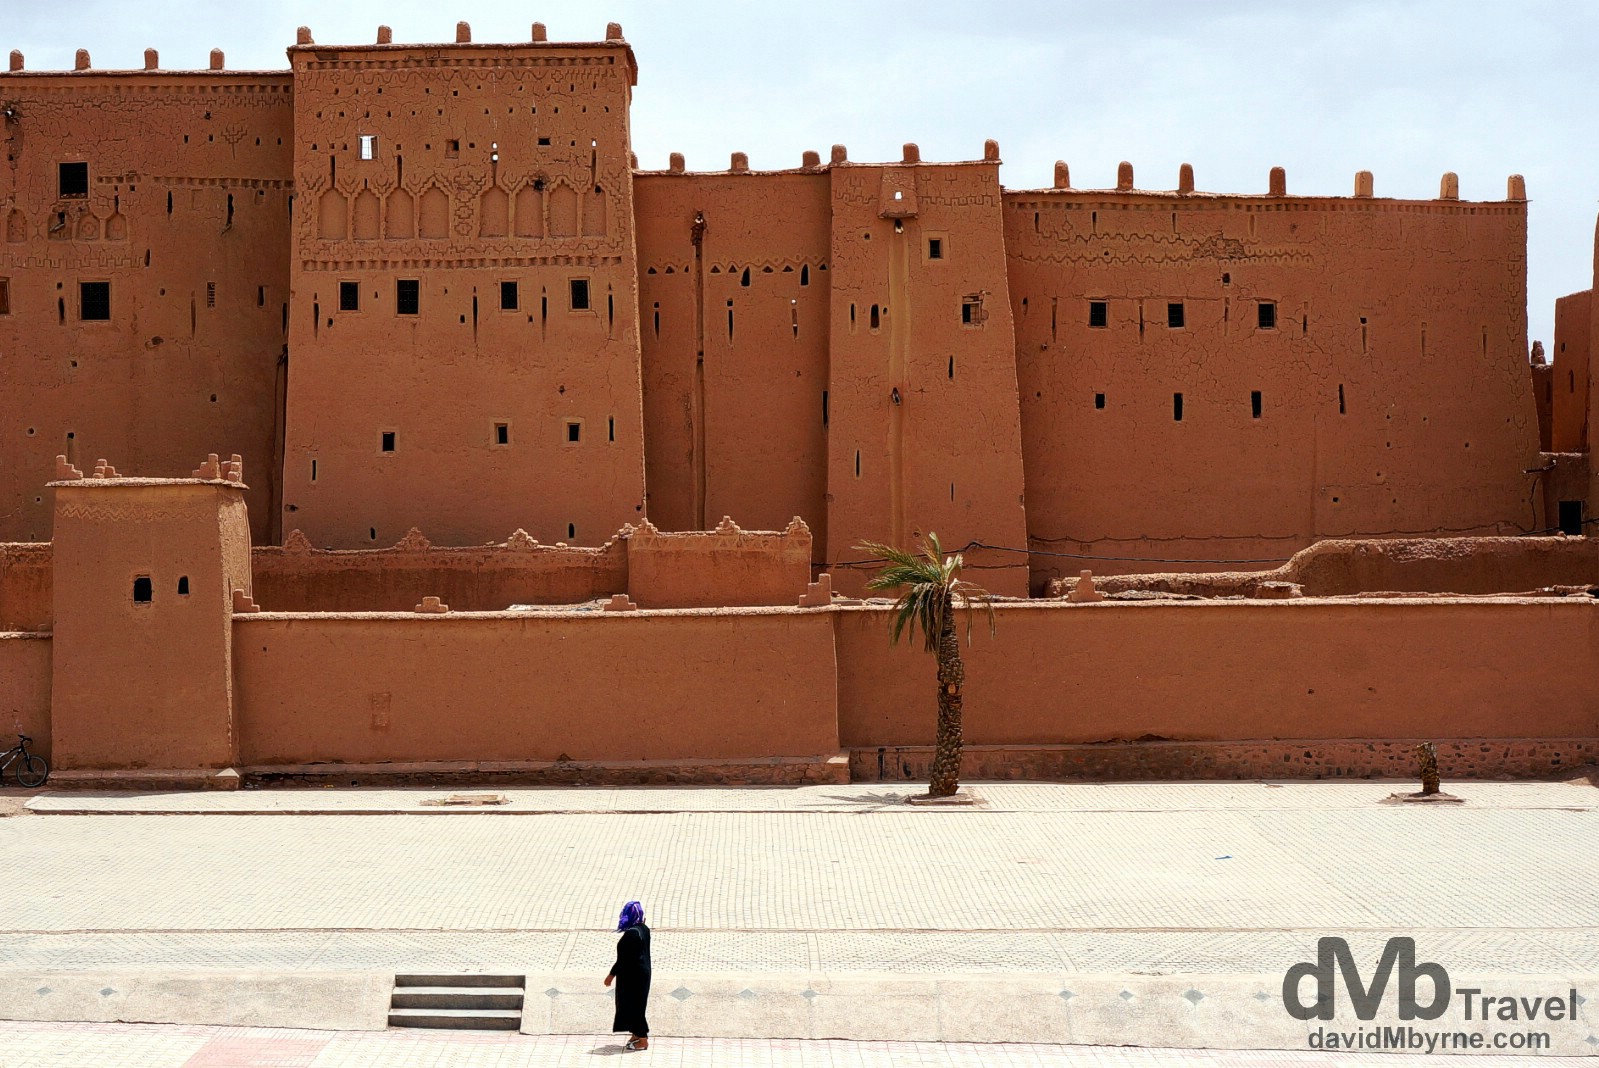 Walking in front of the walls of the Kasbah Taourirt in Ouarzazate, Morocco. May 13th, 2014.